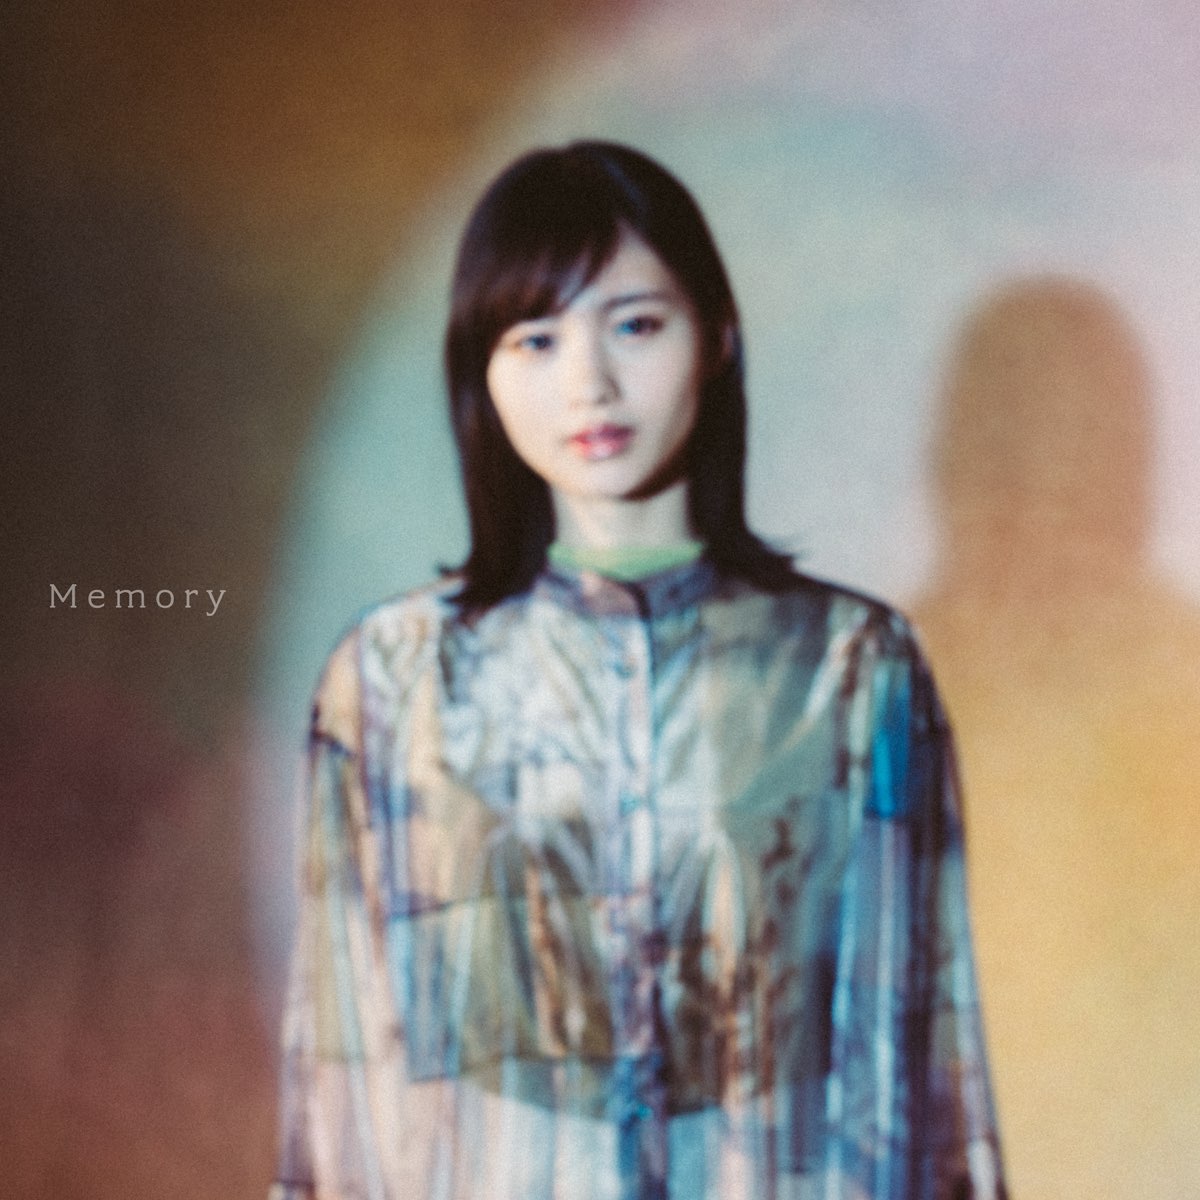 ‎Memory by Marcy on Apple Music